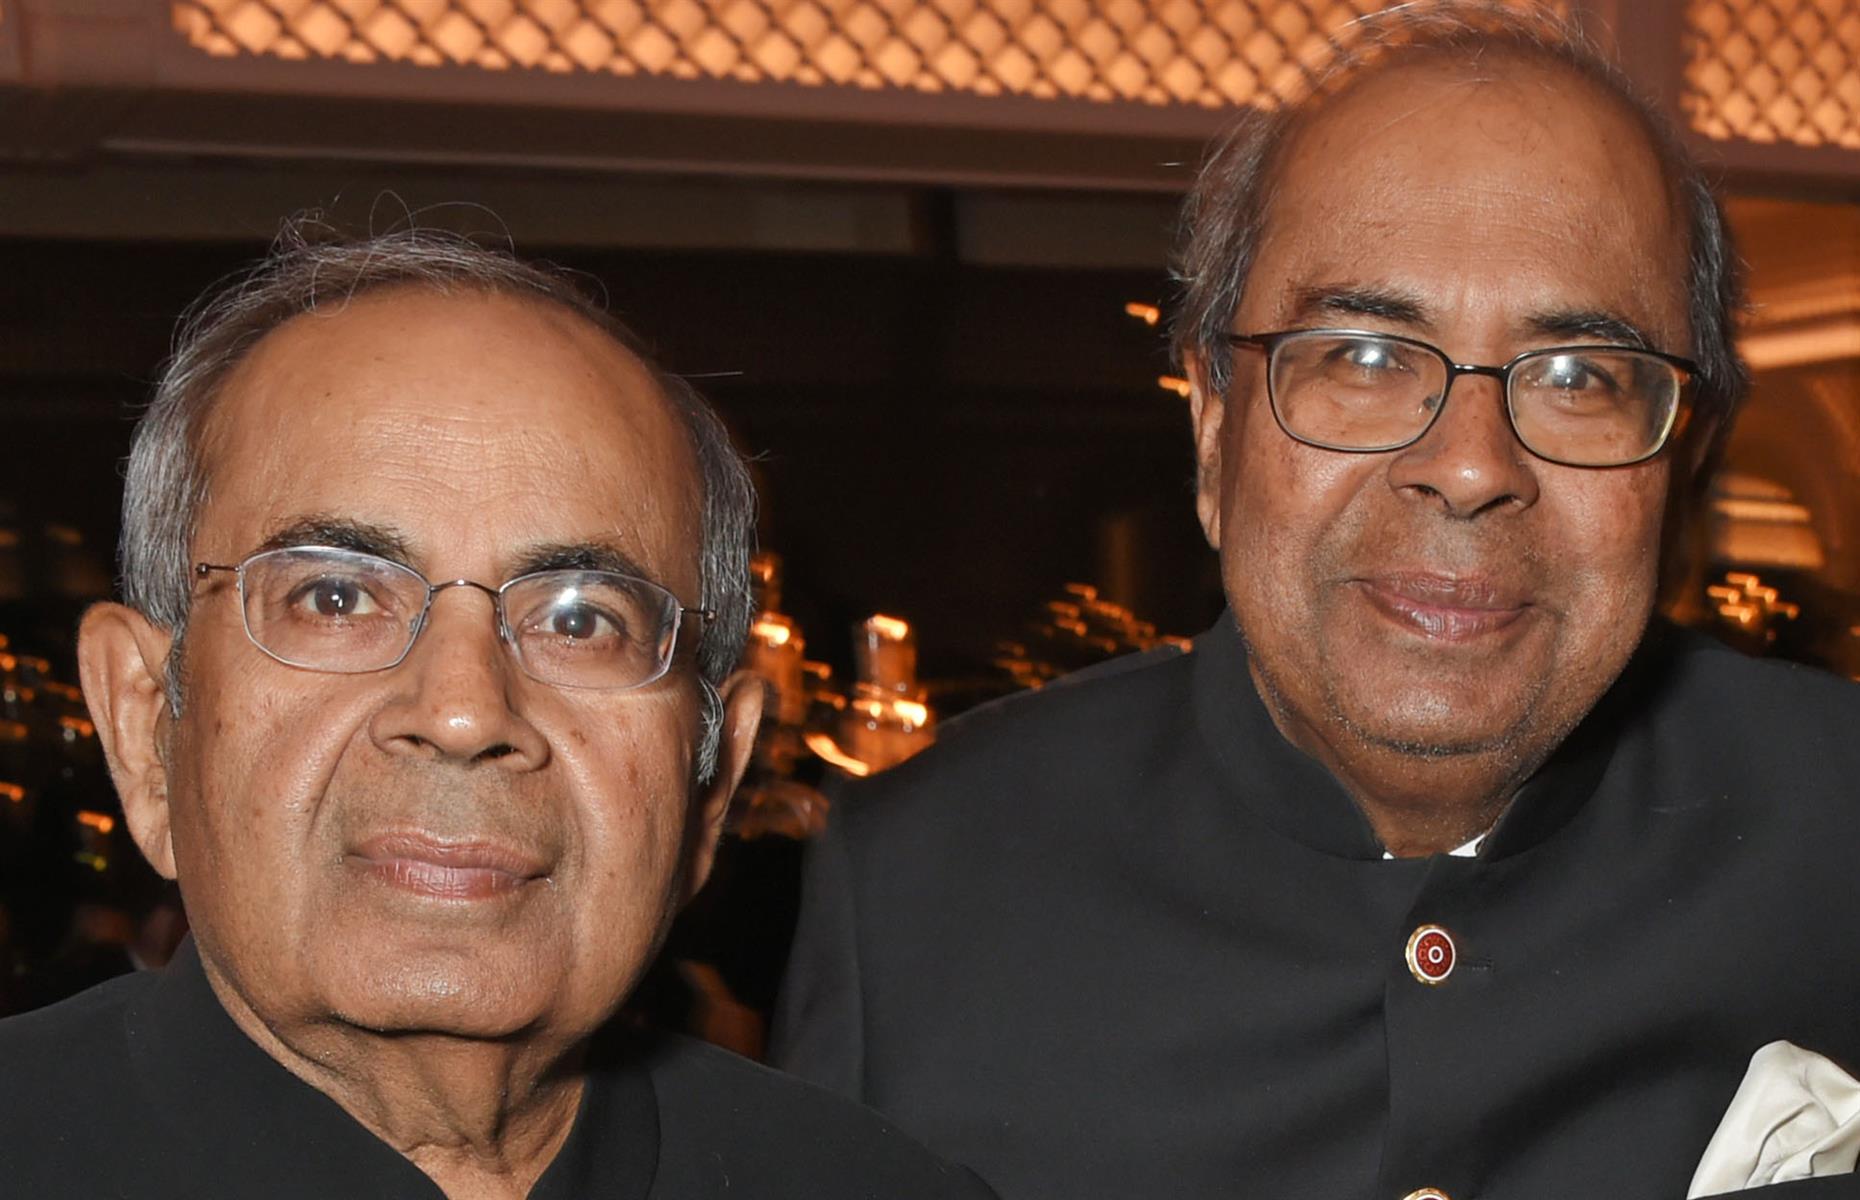 <p>Topping the UK's <em>Sunday Times</em> Rich List, the Indian-born Hinduja family derives its £35 billion ($43.4bn) fortune from the Hinduja group: a global conglomerate with interests ranging from healthcare to banking. The clan owns swathes of luxury real estate in London, including a 67,000-square-foot property near Buckingham Palace. </p>  <p>Proving that money can't always buy happiness, however, the Hindujas have been feuding for years. Sri Hinduja, who passed away in May this year, took his brothers Gopi (pictured right), Prakash (pictured left), and Ashok to court in 2015 following a disagreement over the ownership of a Swiss bank. Last year a judge overseeing the case ruled that Sri's medical needs, primarily treatment for dementia, weren't being met amid the tension.</p>